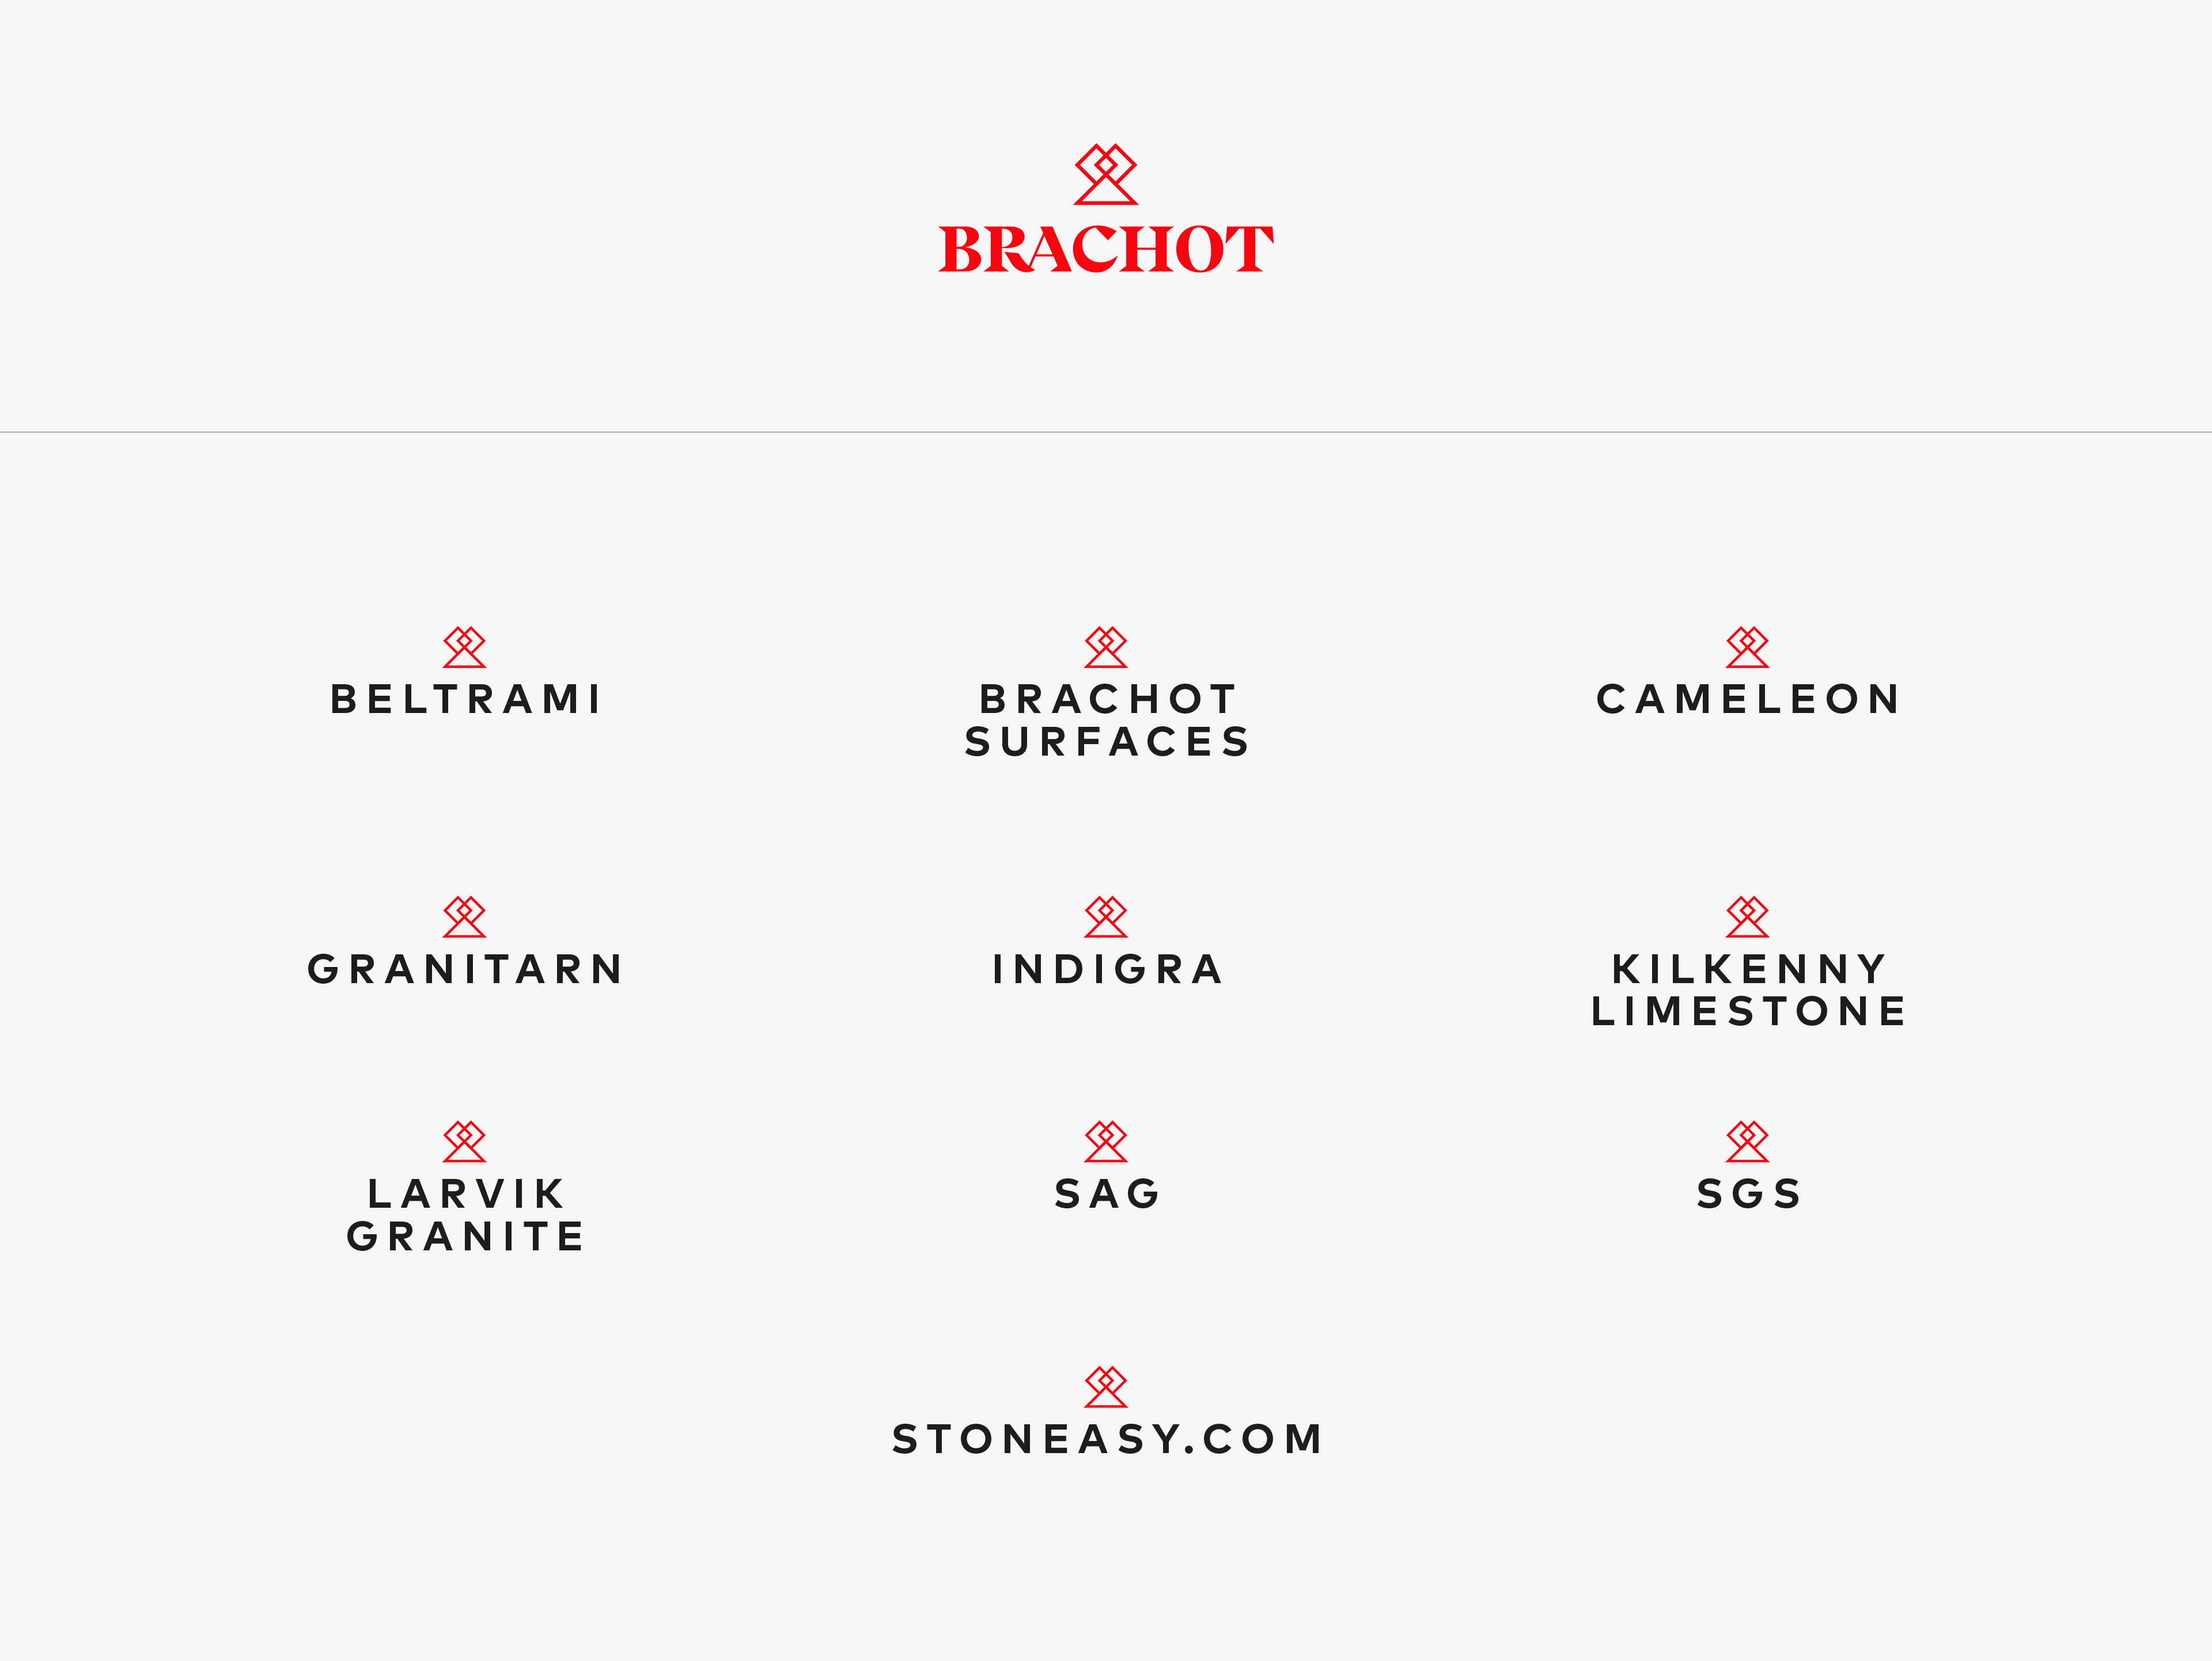 Brachot-Hermant branding - Building a solidified family that reinforces the group's powerful connection